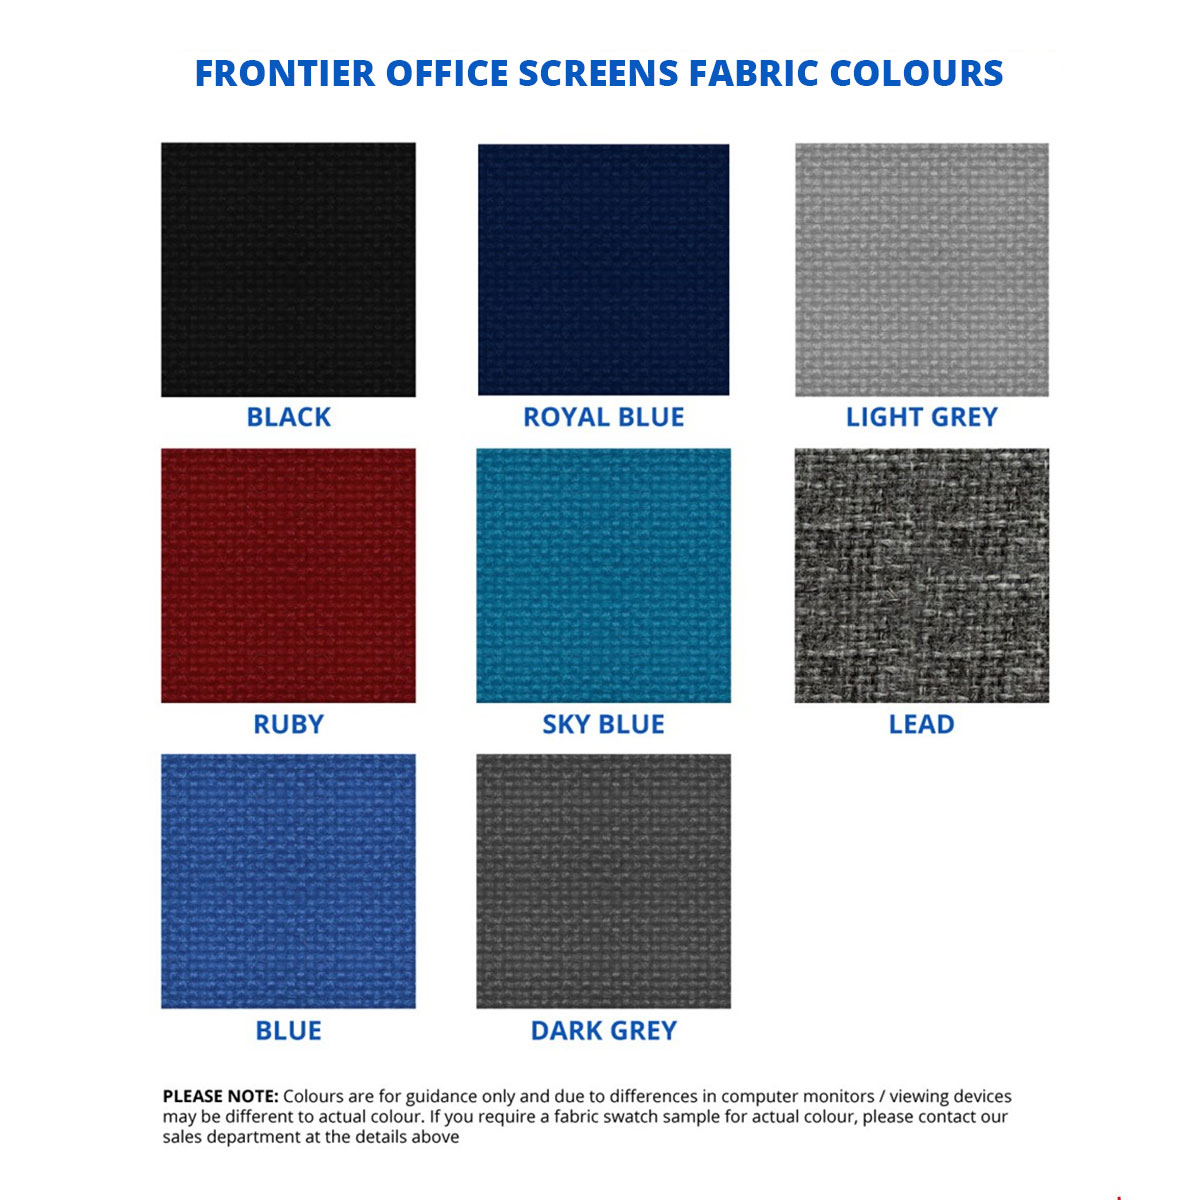 FRONTIER® Office Screen Desk Dividers Are Available in 8 Fabric Colours